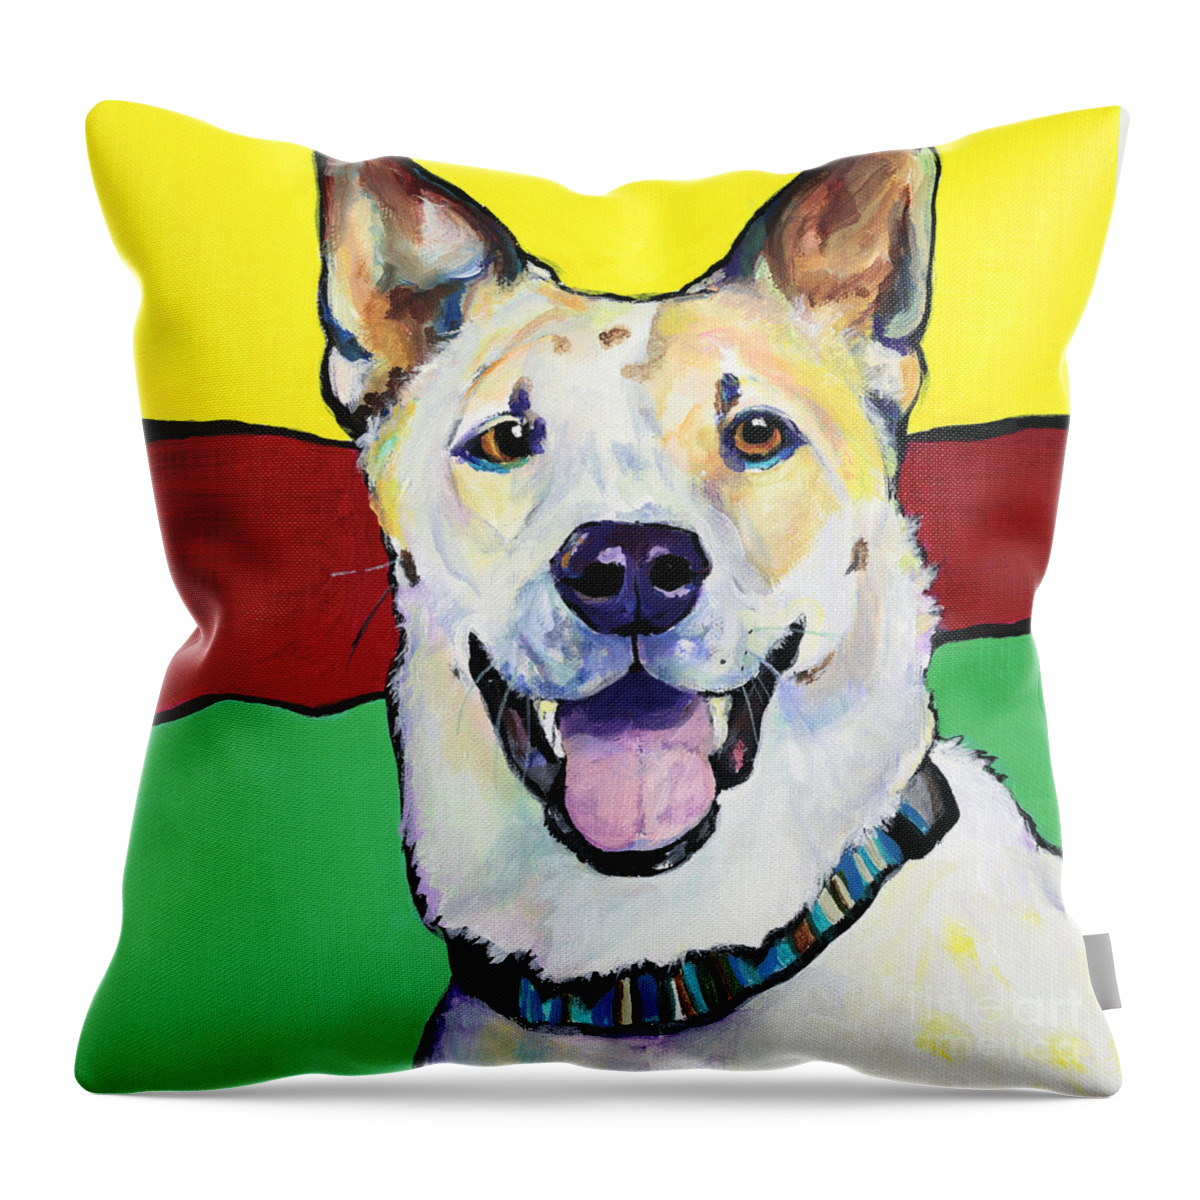 Animal Portraits Throw Pillow featuring the painting Sydney by Pat Saunders-White